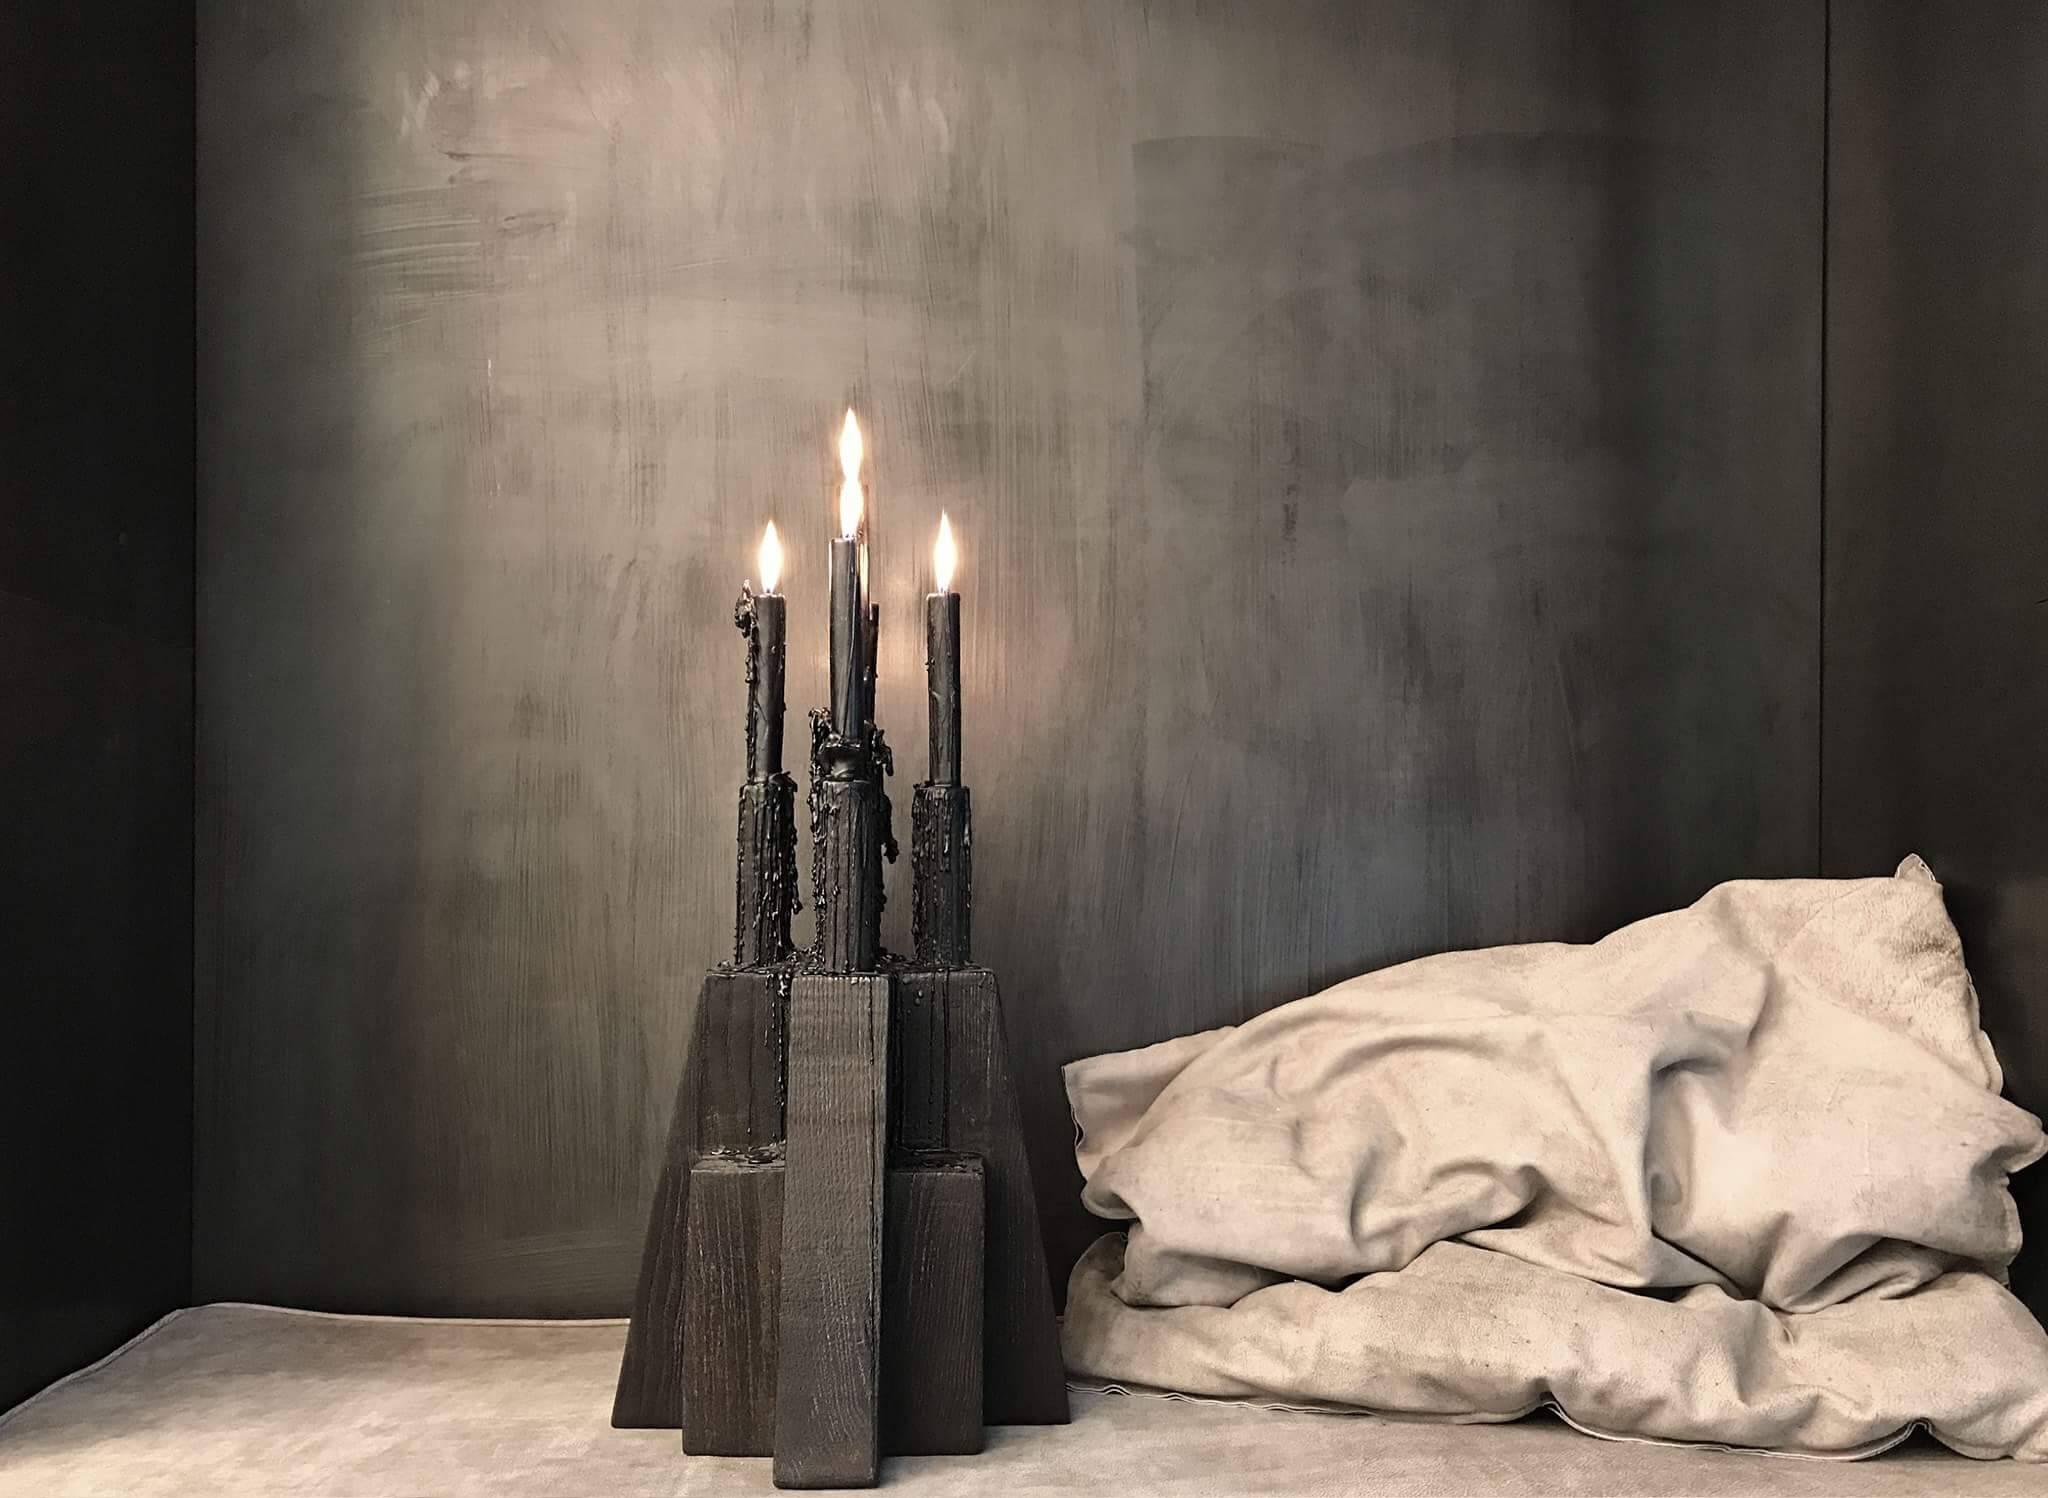 Bunker
Candleholder
Measures: 50 cm H x 32 cm W, 19.7” H x 12.6” W
Oak

Arno Declercq
Belgian designer and art dealer who makes bespoke objects with passion for design, atmosphere, history and craft. Arno grew up in a family with parents who